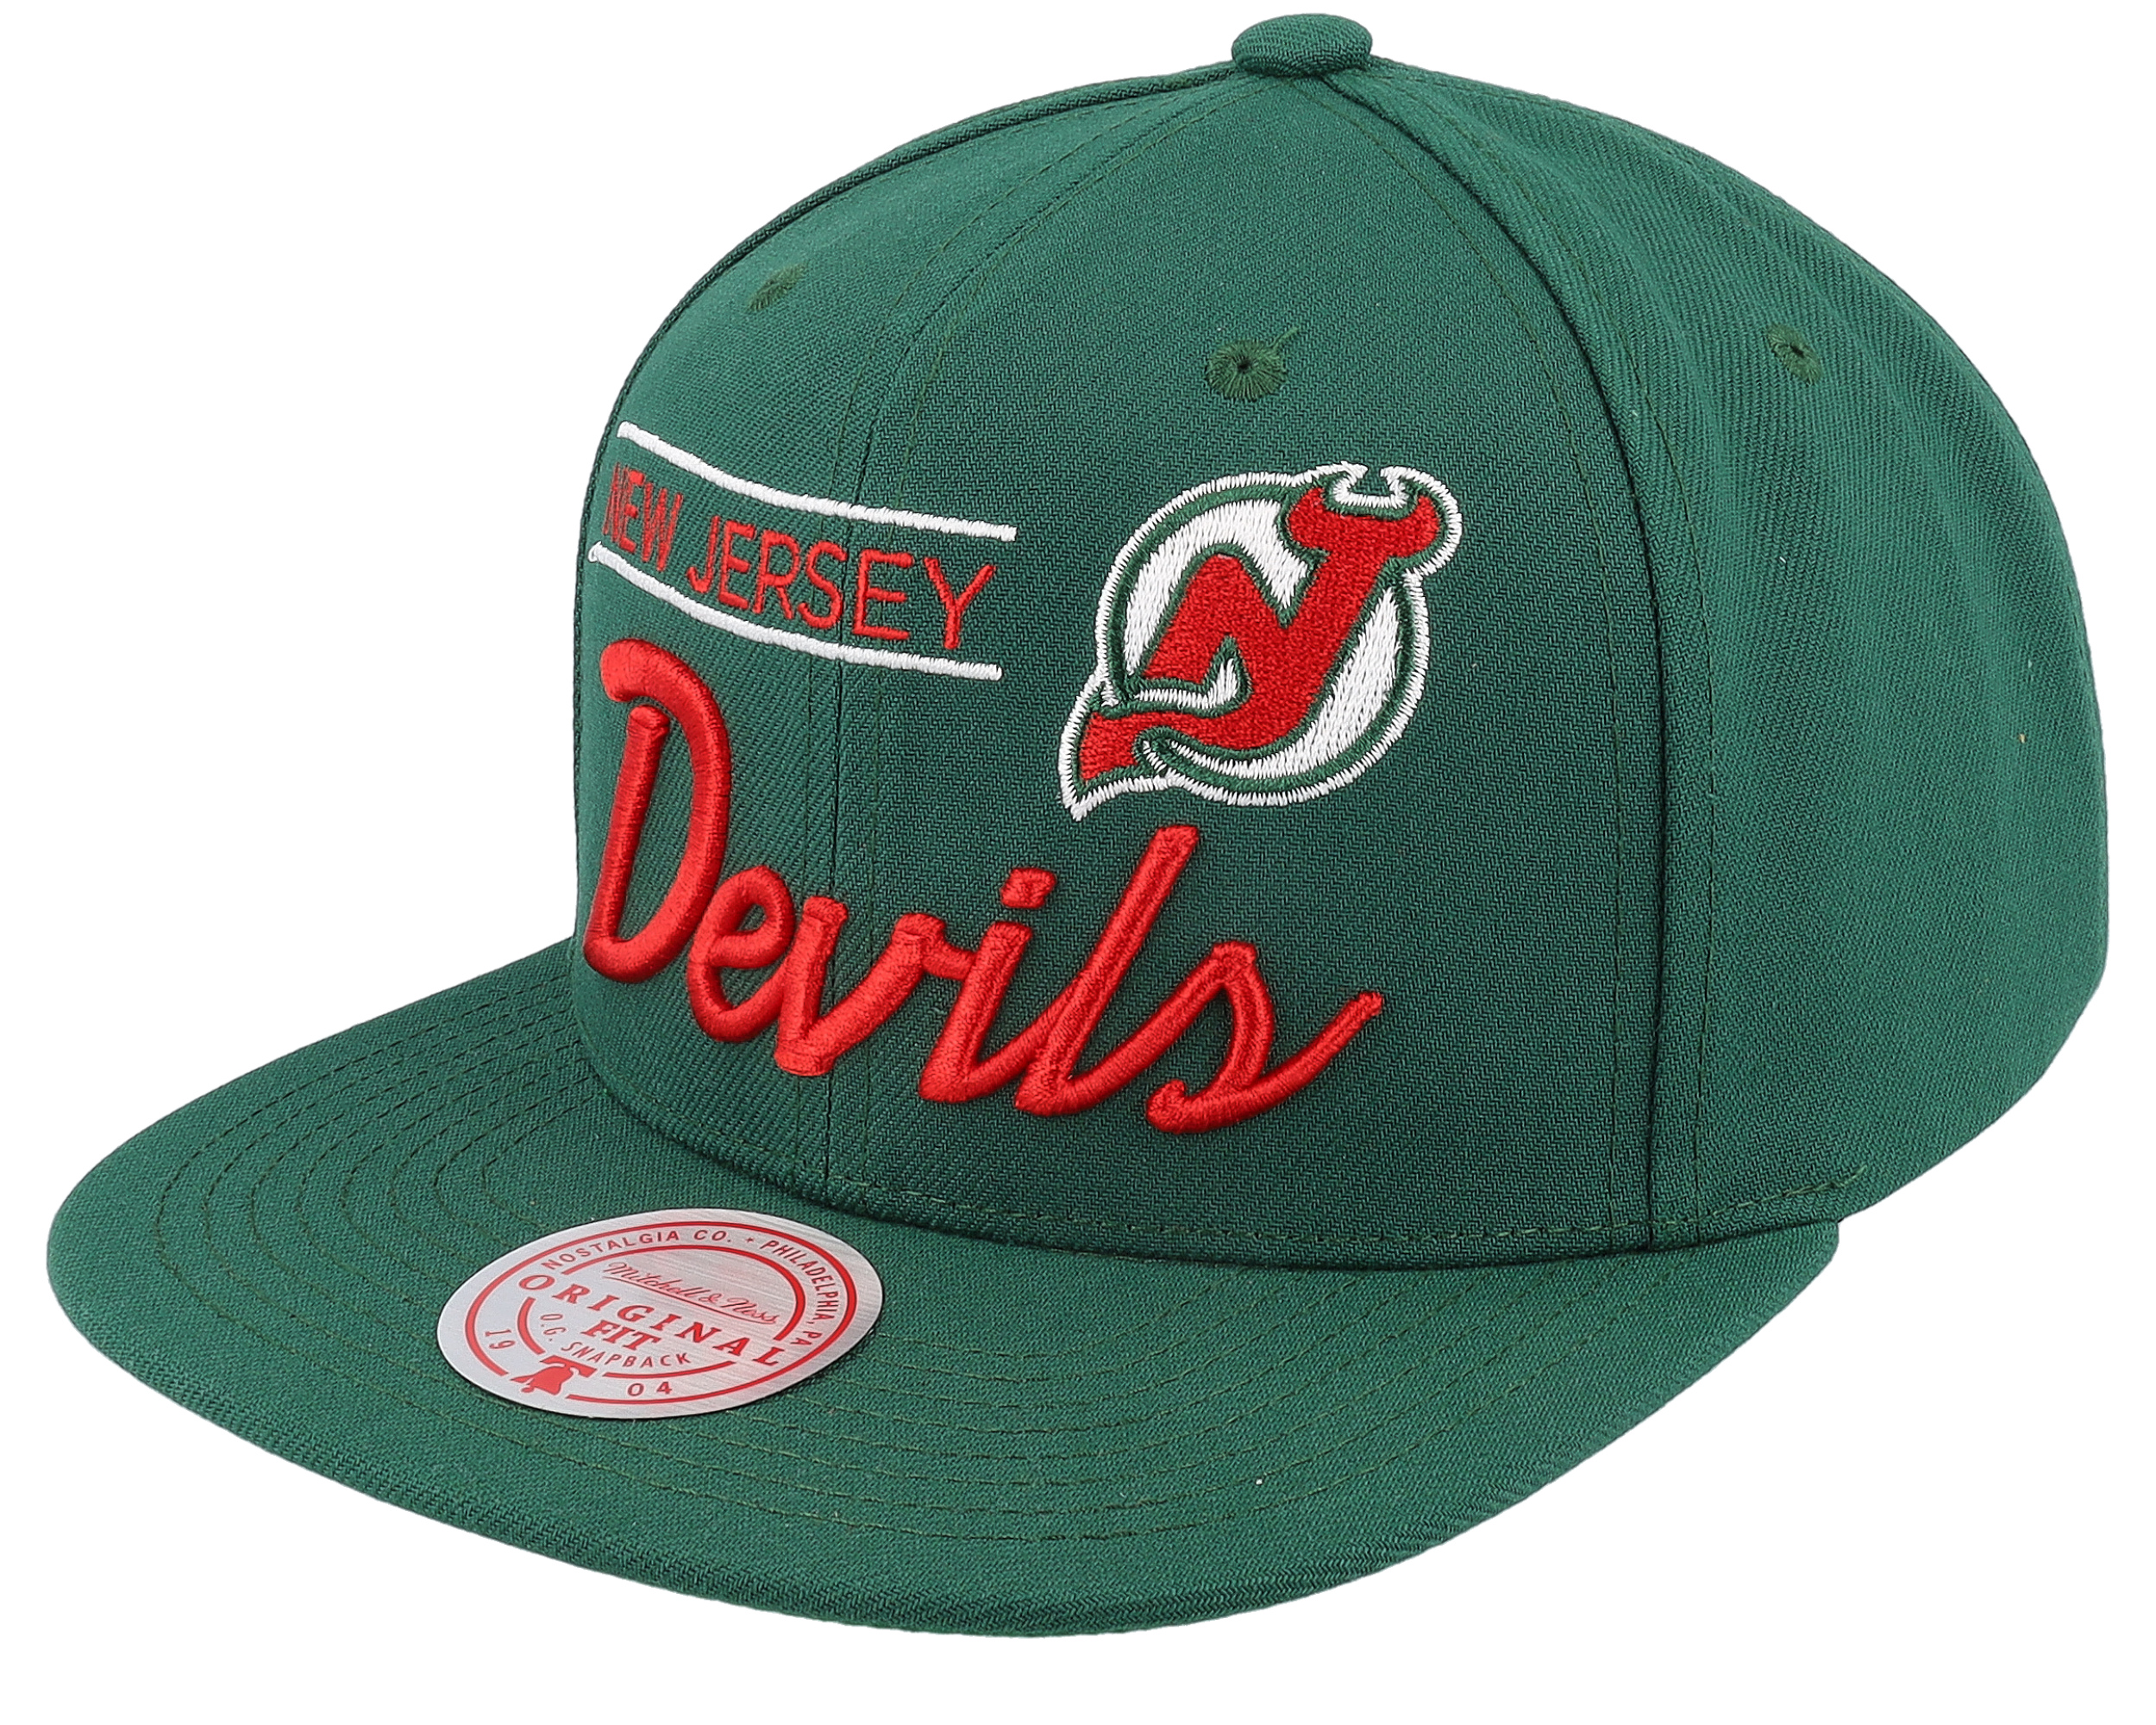 New Era, Accessories, New Jersey Devils Fitted Hat Nhl